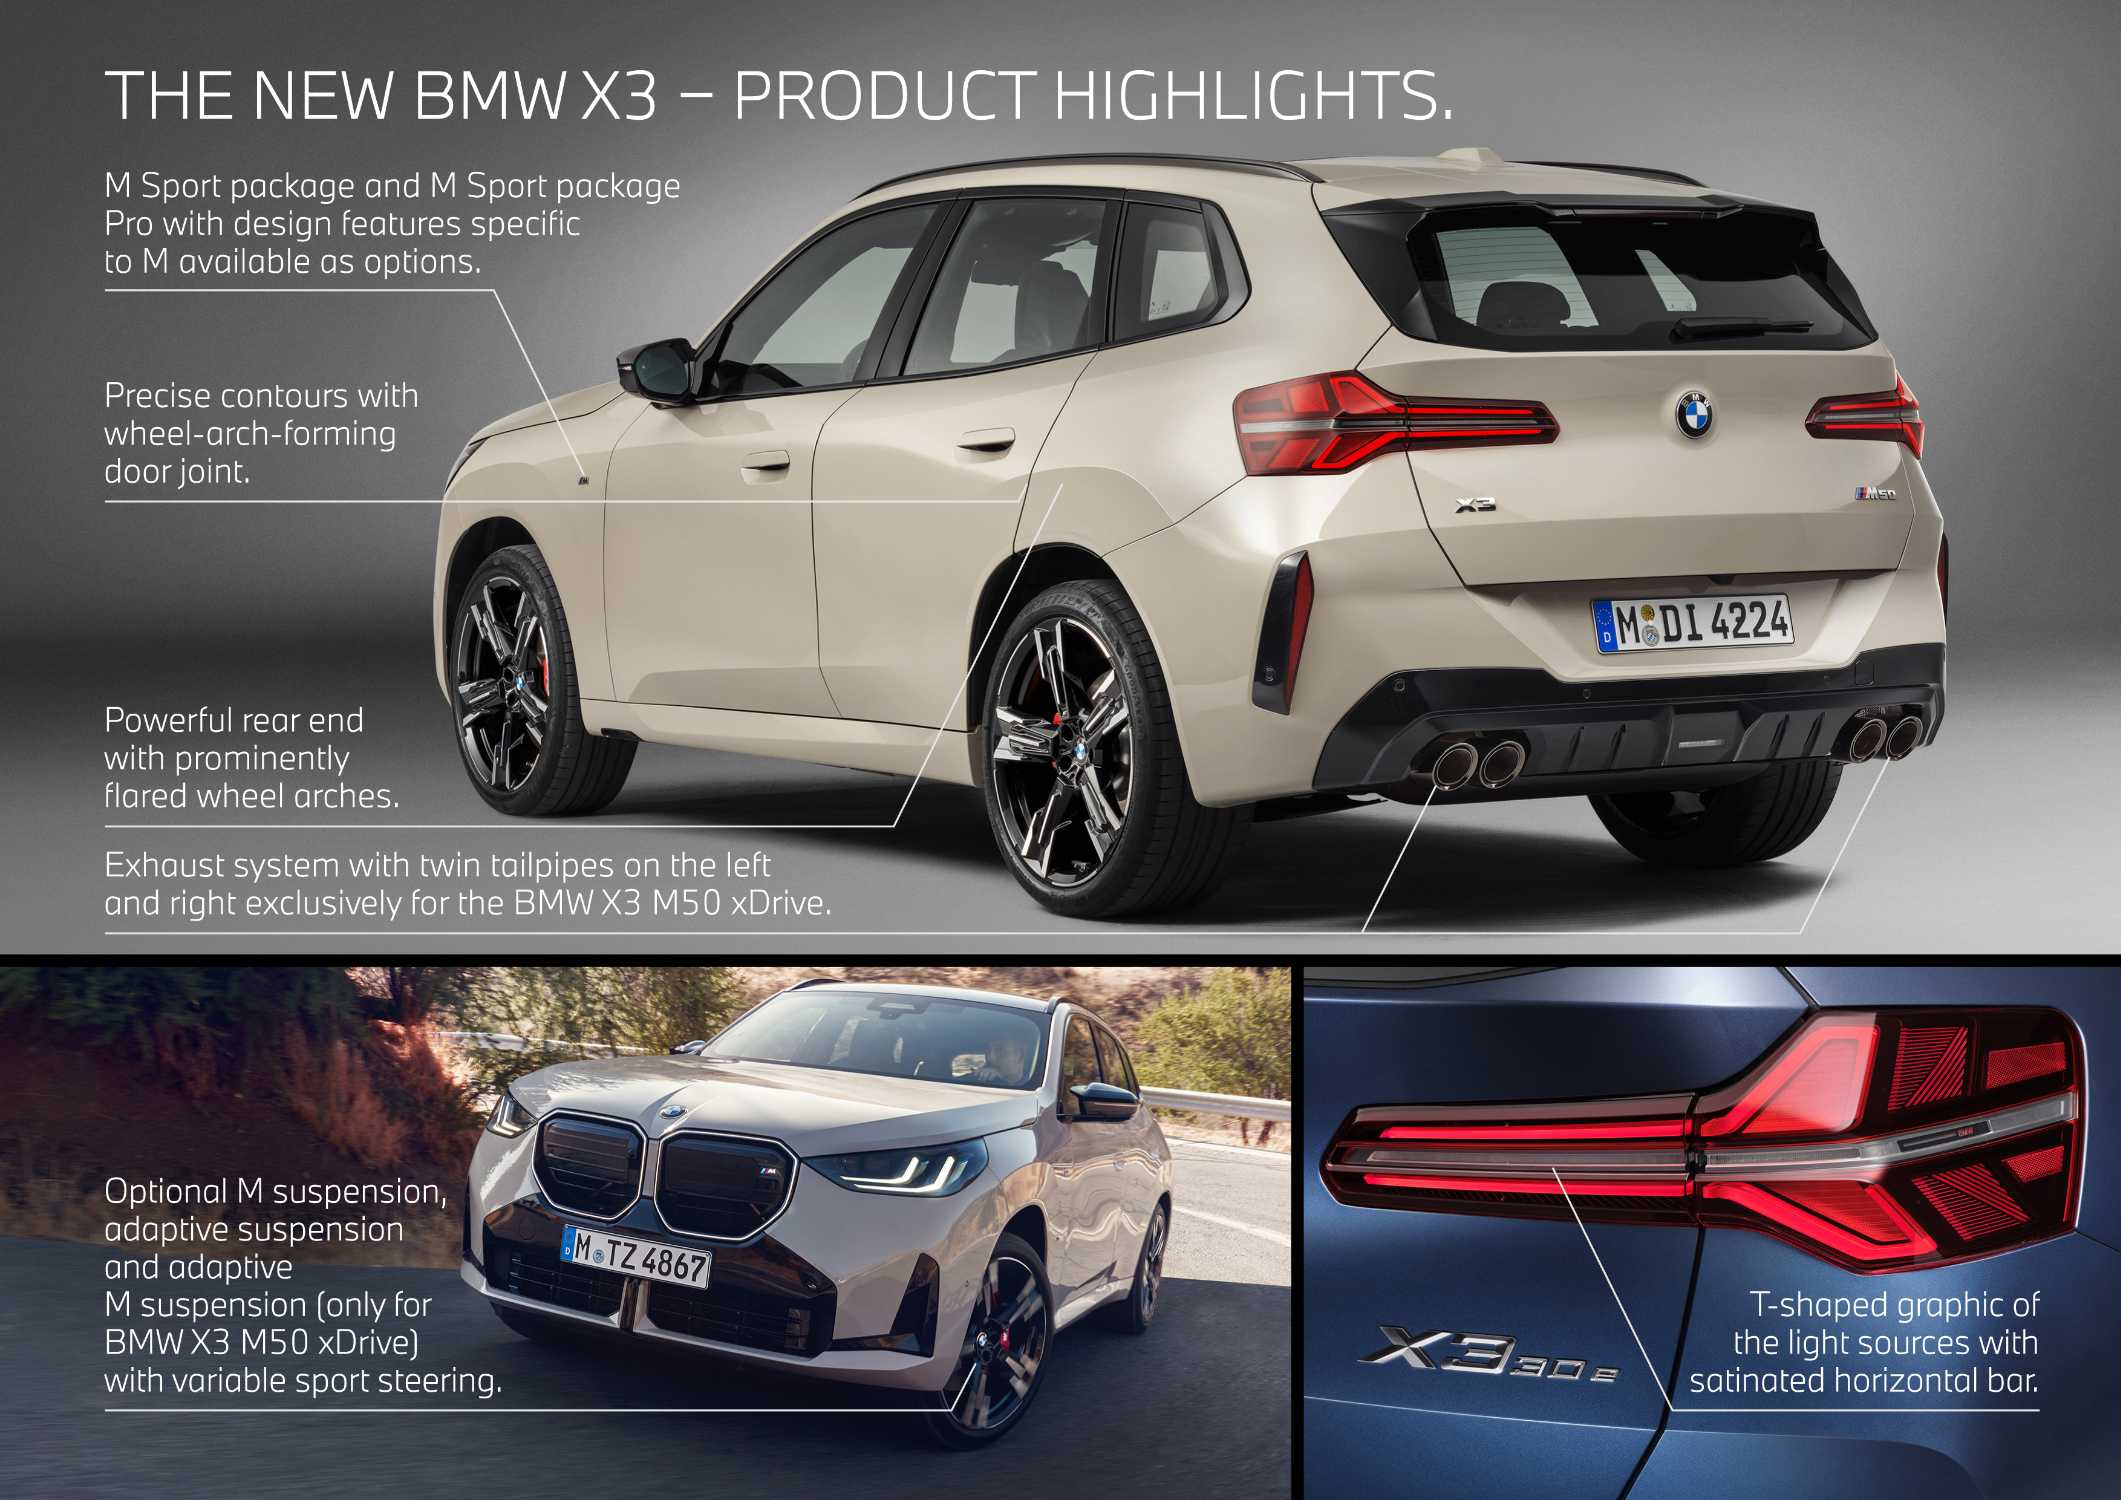 The new BMW X3 M50 xDrive - Infographic. (06/2024)